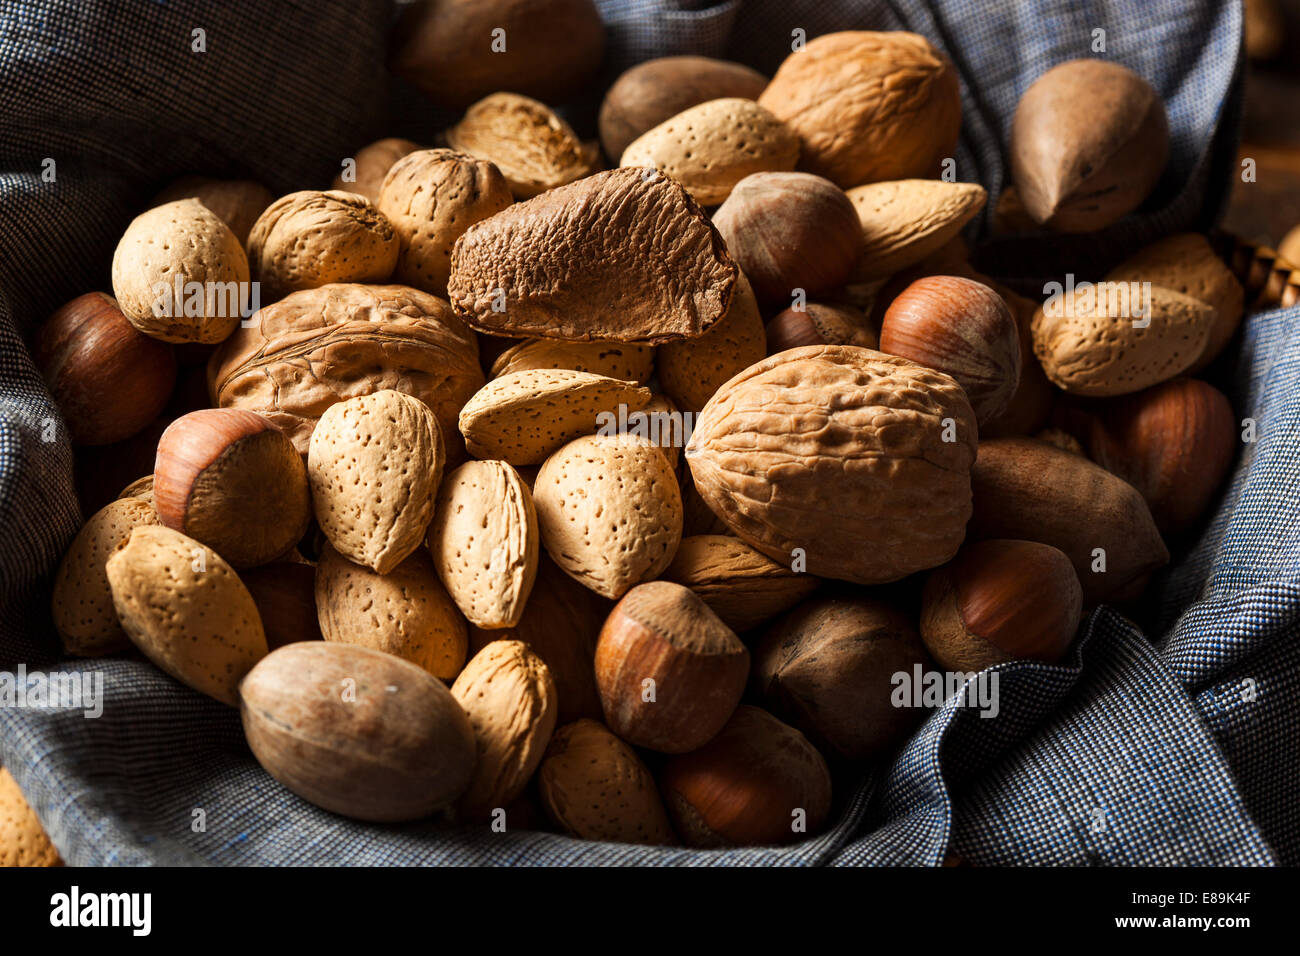 Assortment of Whole Raw Mixed Nuts for the Holidays Stock Photo